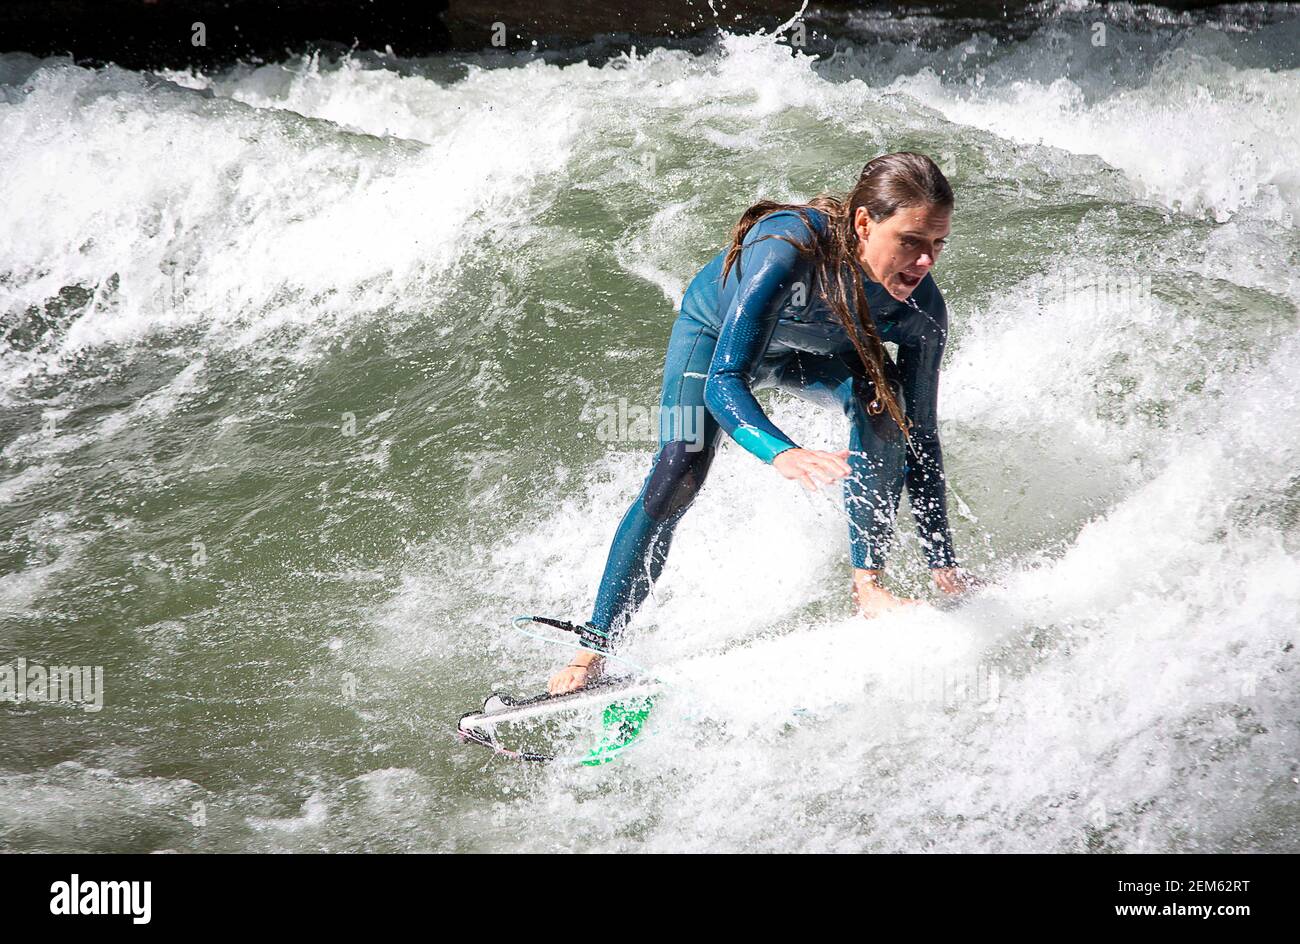 Munich, Bavaria, Germany. 13th Oct, 2018. September 20, 2018. A surfer performs a 360 as she rides the wave on the Eisbach, which is a manmade side arm of the Isar River and flows thru the Englischer Garten in the city center of Munich. A standing wave has been created that allows landlocked Germans to ride waves just like in the ocean but it is in the heart of Munich, Germany. Credit: Ralph Lauer/ZUMA Wire/Alamy Live News Stock Photo